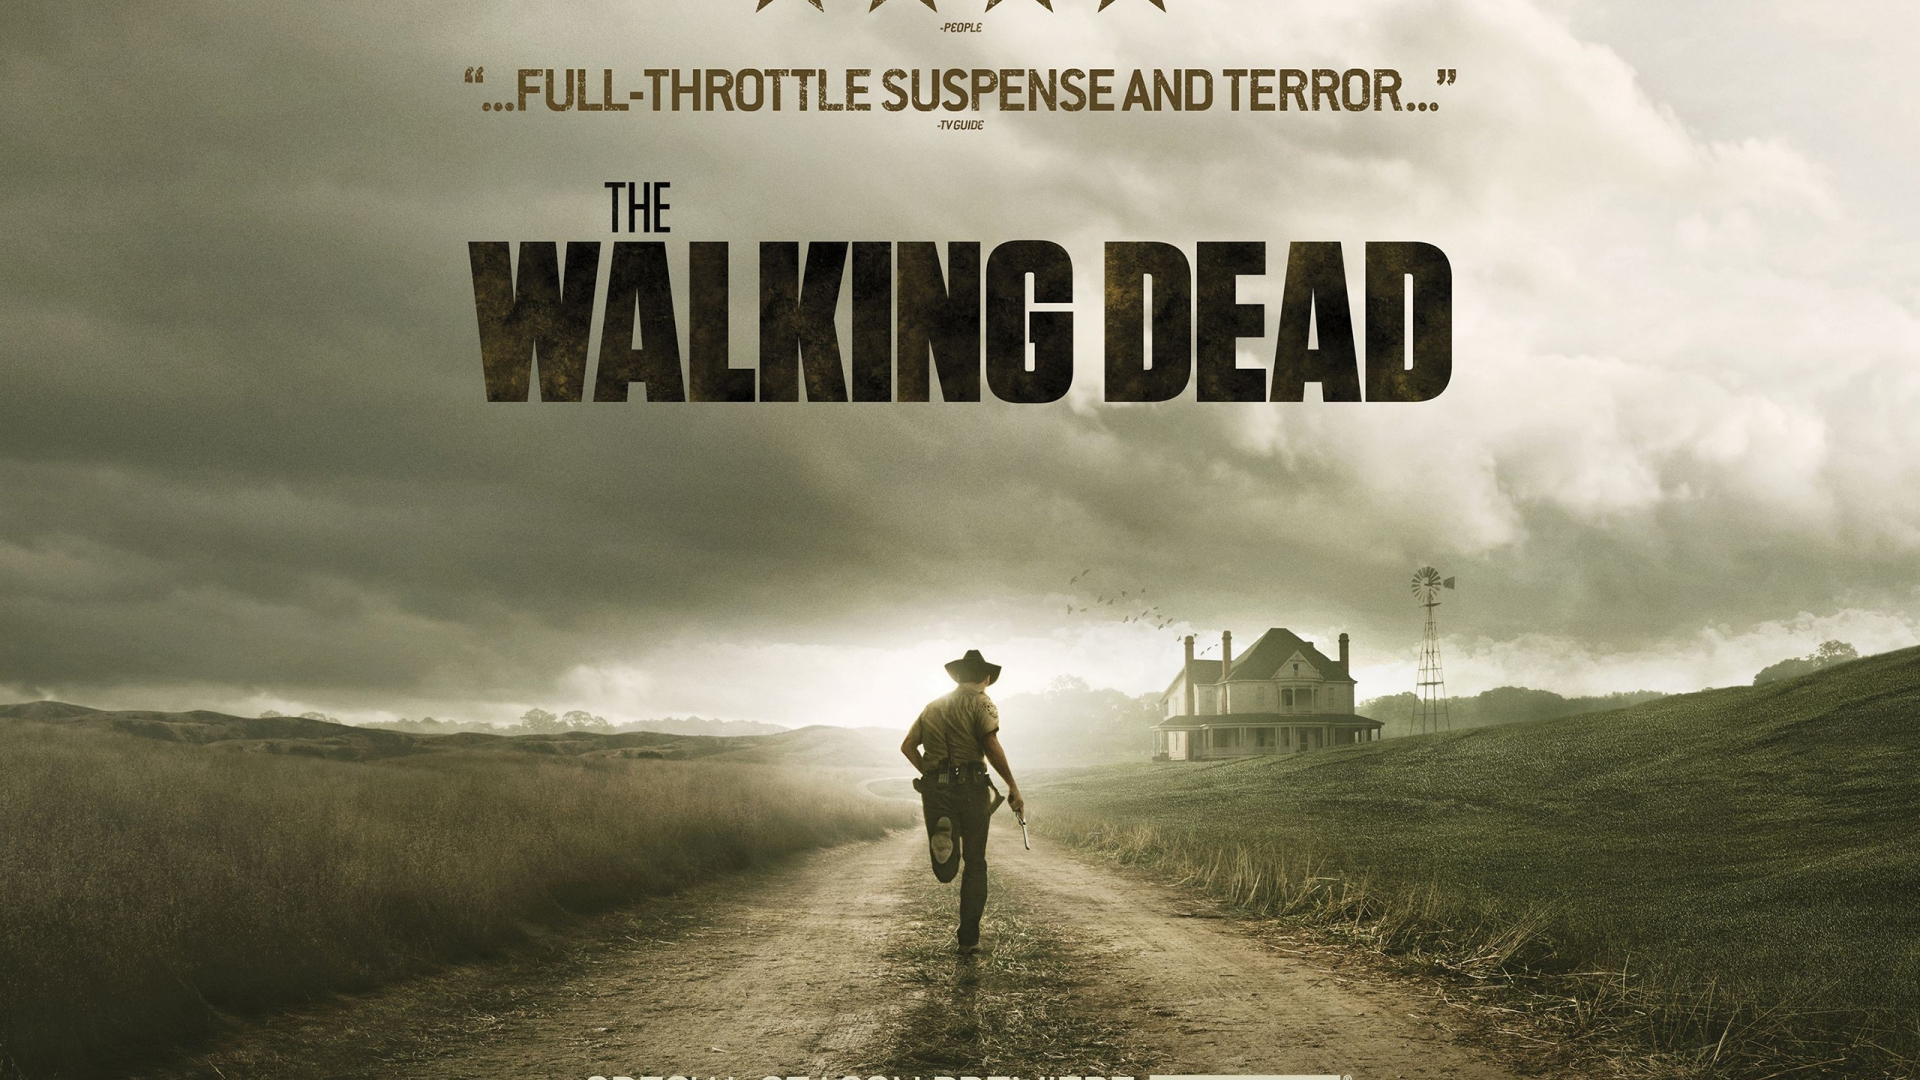 The Walking Dead Tv SHow for 1920 x 1080 HDTV 1080p resolution